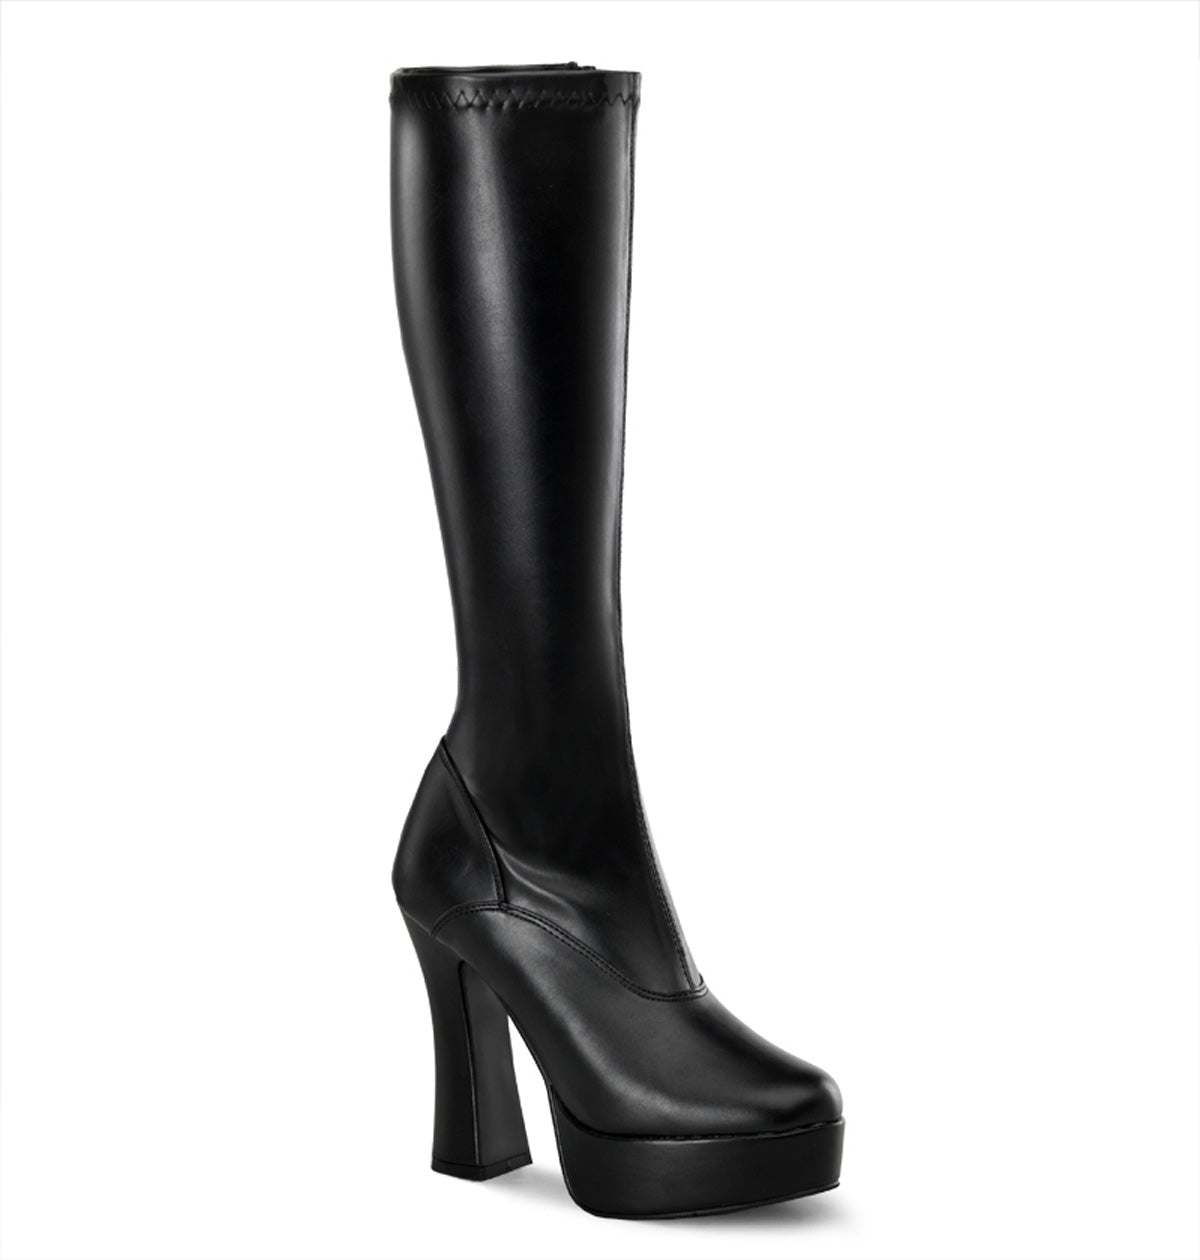 ELECTRA-2000Z Black Stretch Faux Leather Knee Boot Pleaser